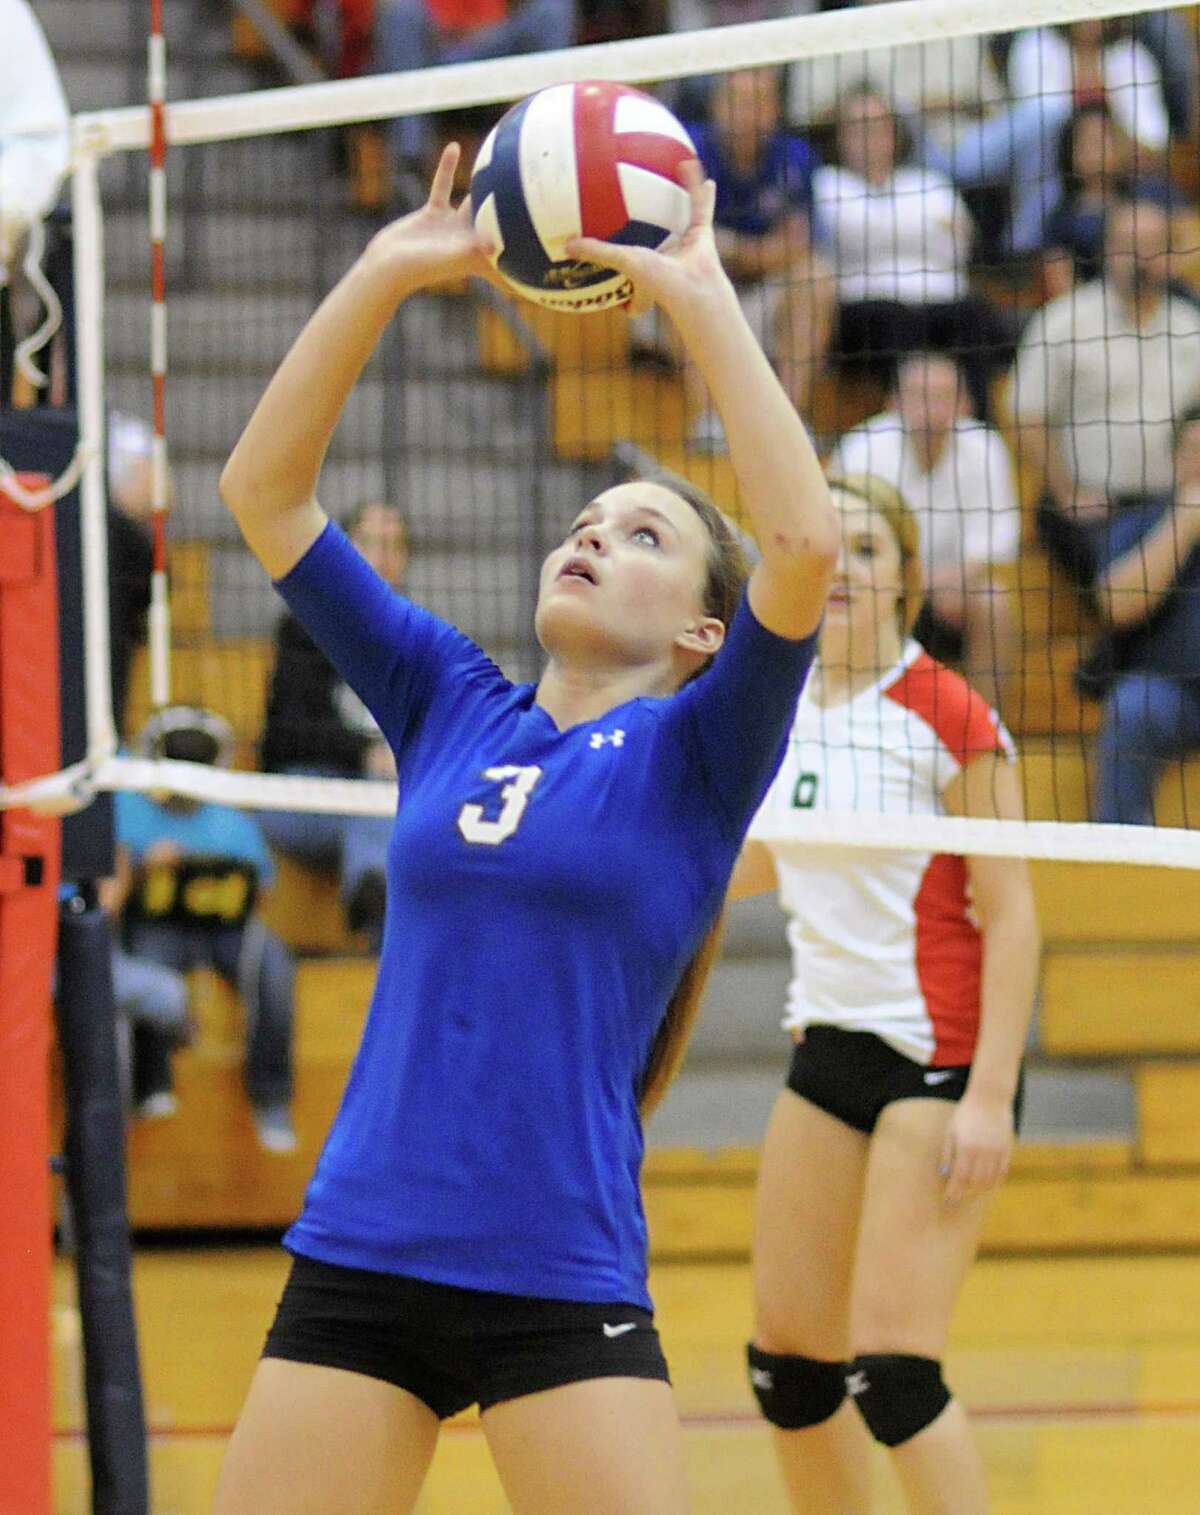 Oak Ridge's Jaclyn Ward sets the ball during the Oak Ridge at The Woodlands volleyball game. Photo by David Hopper